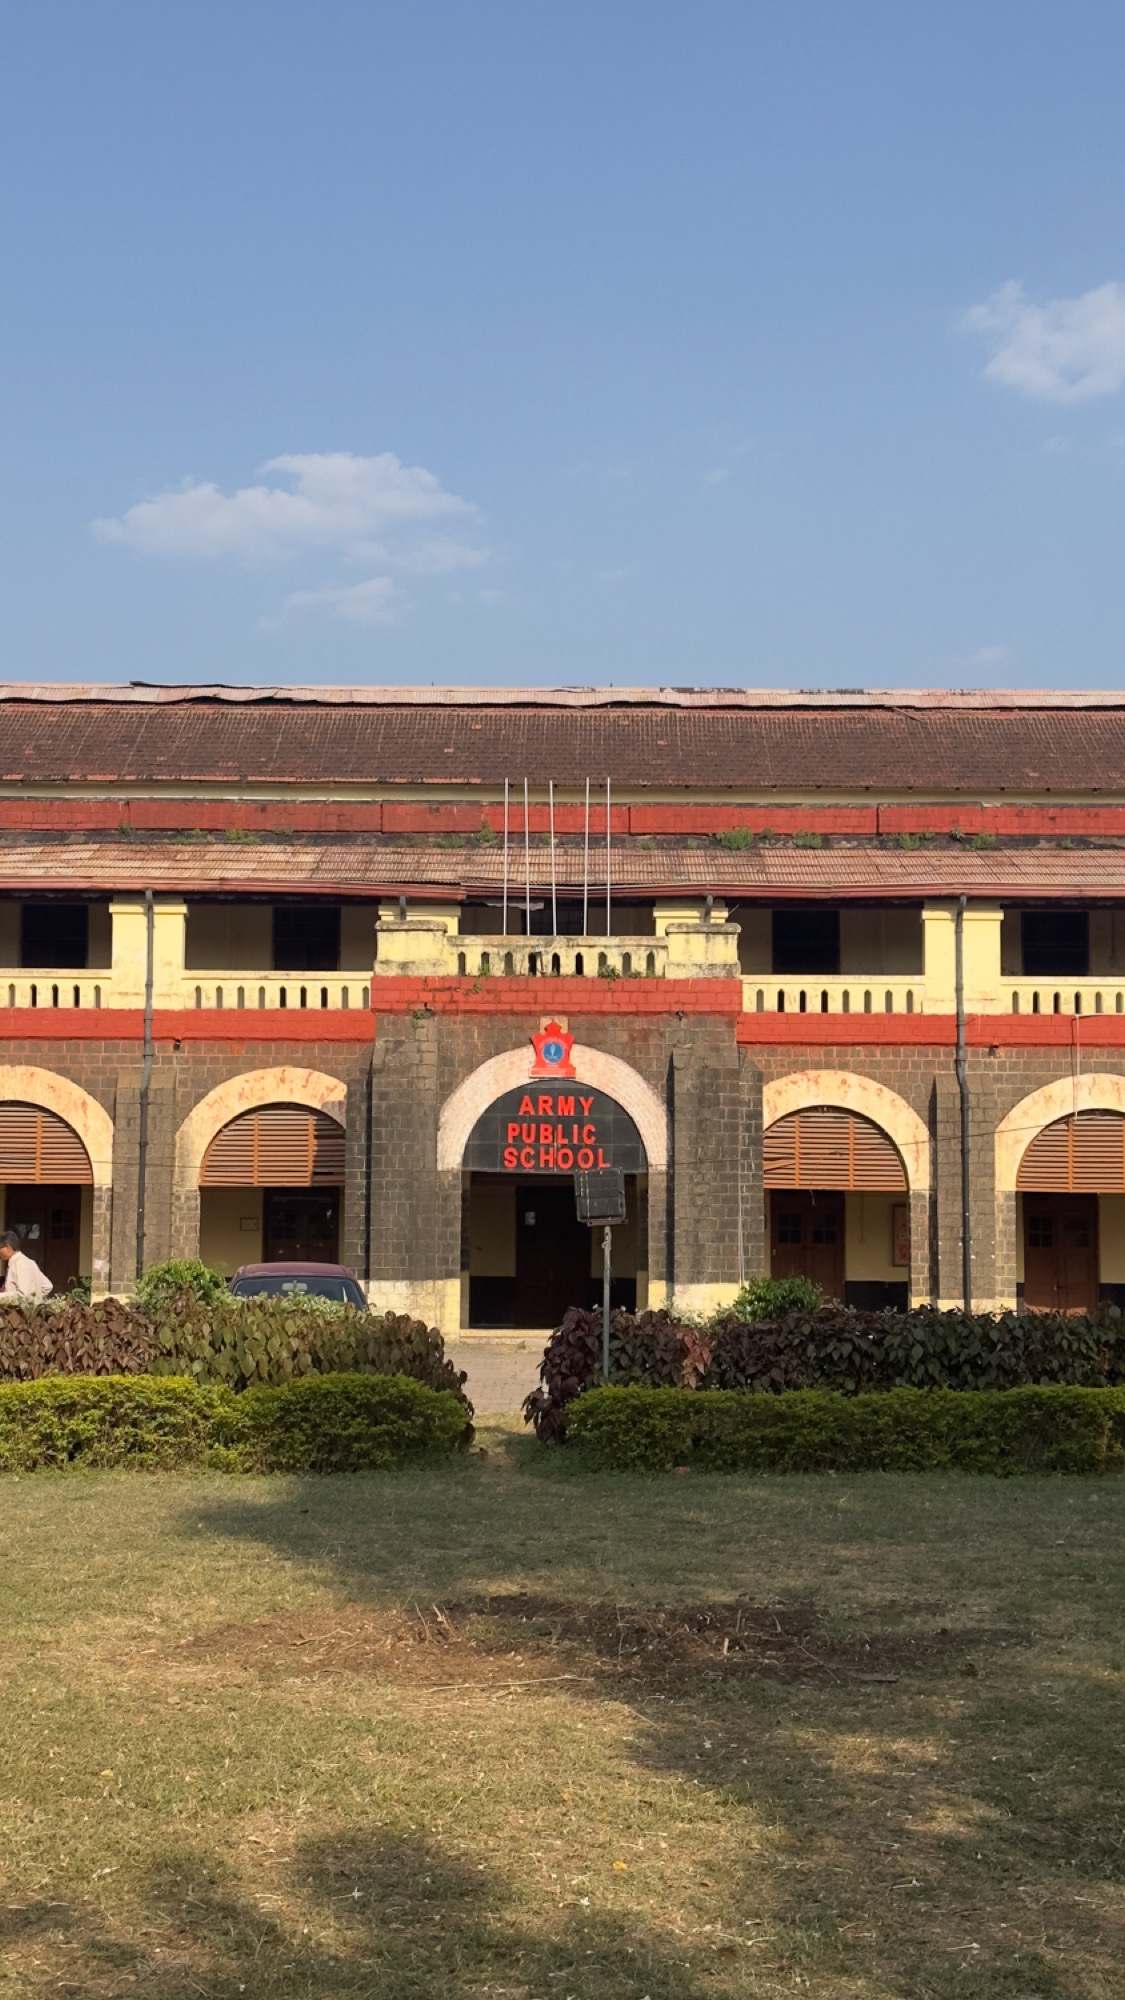 Heritage at risk: Outcry to stop demolition of a 157 year old Army Public School at MHOW 21